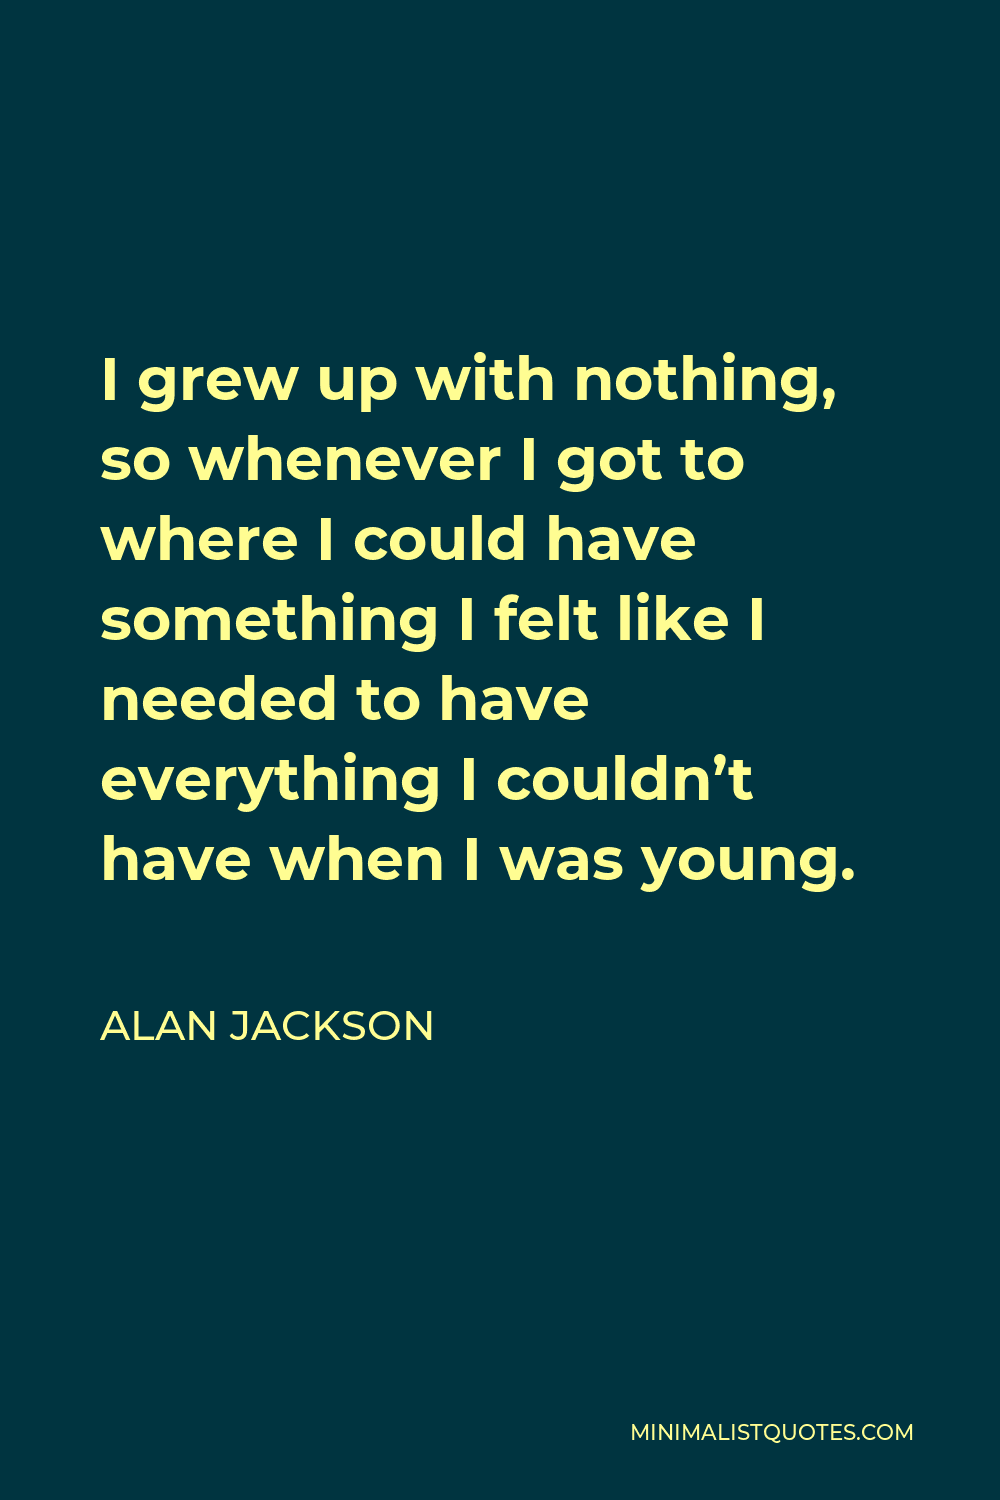 Alan Jackson Quote - I grew up with nothing, so whenever I got to where I could have something I felt like I needed to have everything I couldn’t have when I was young.